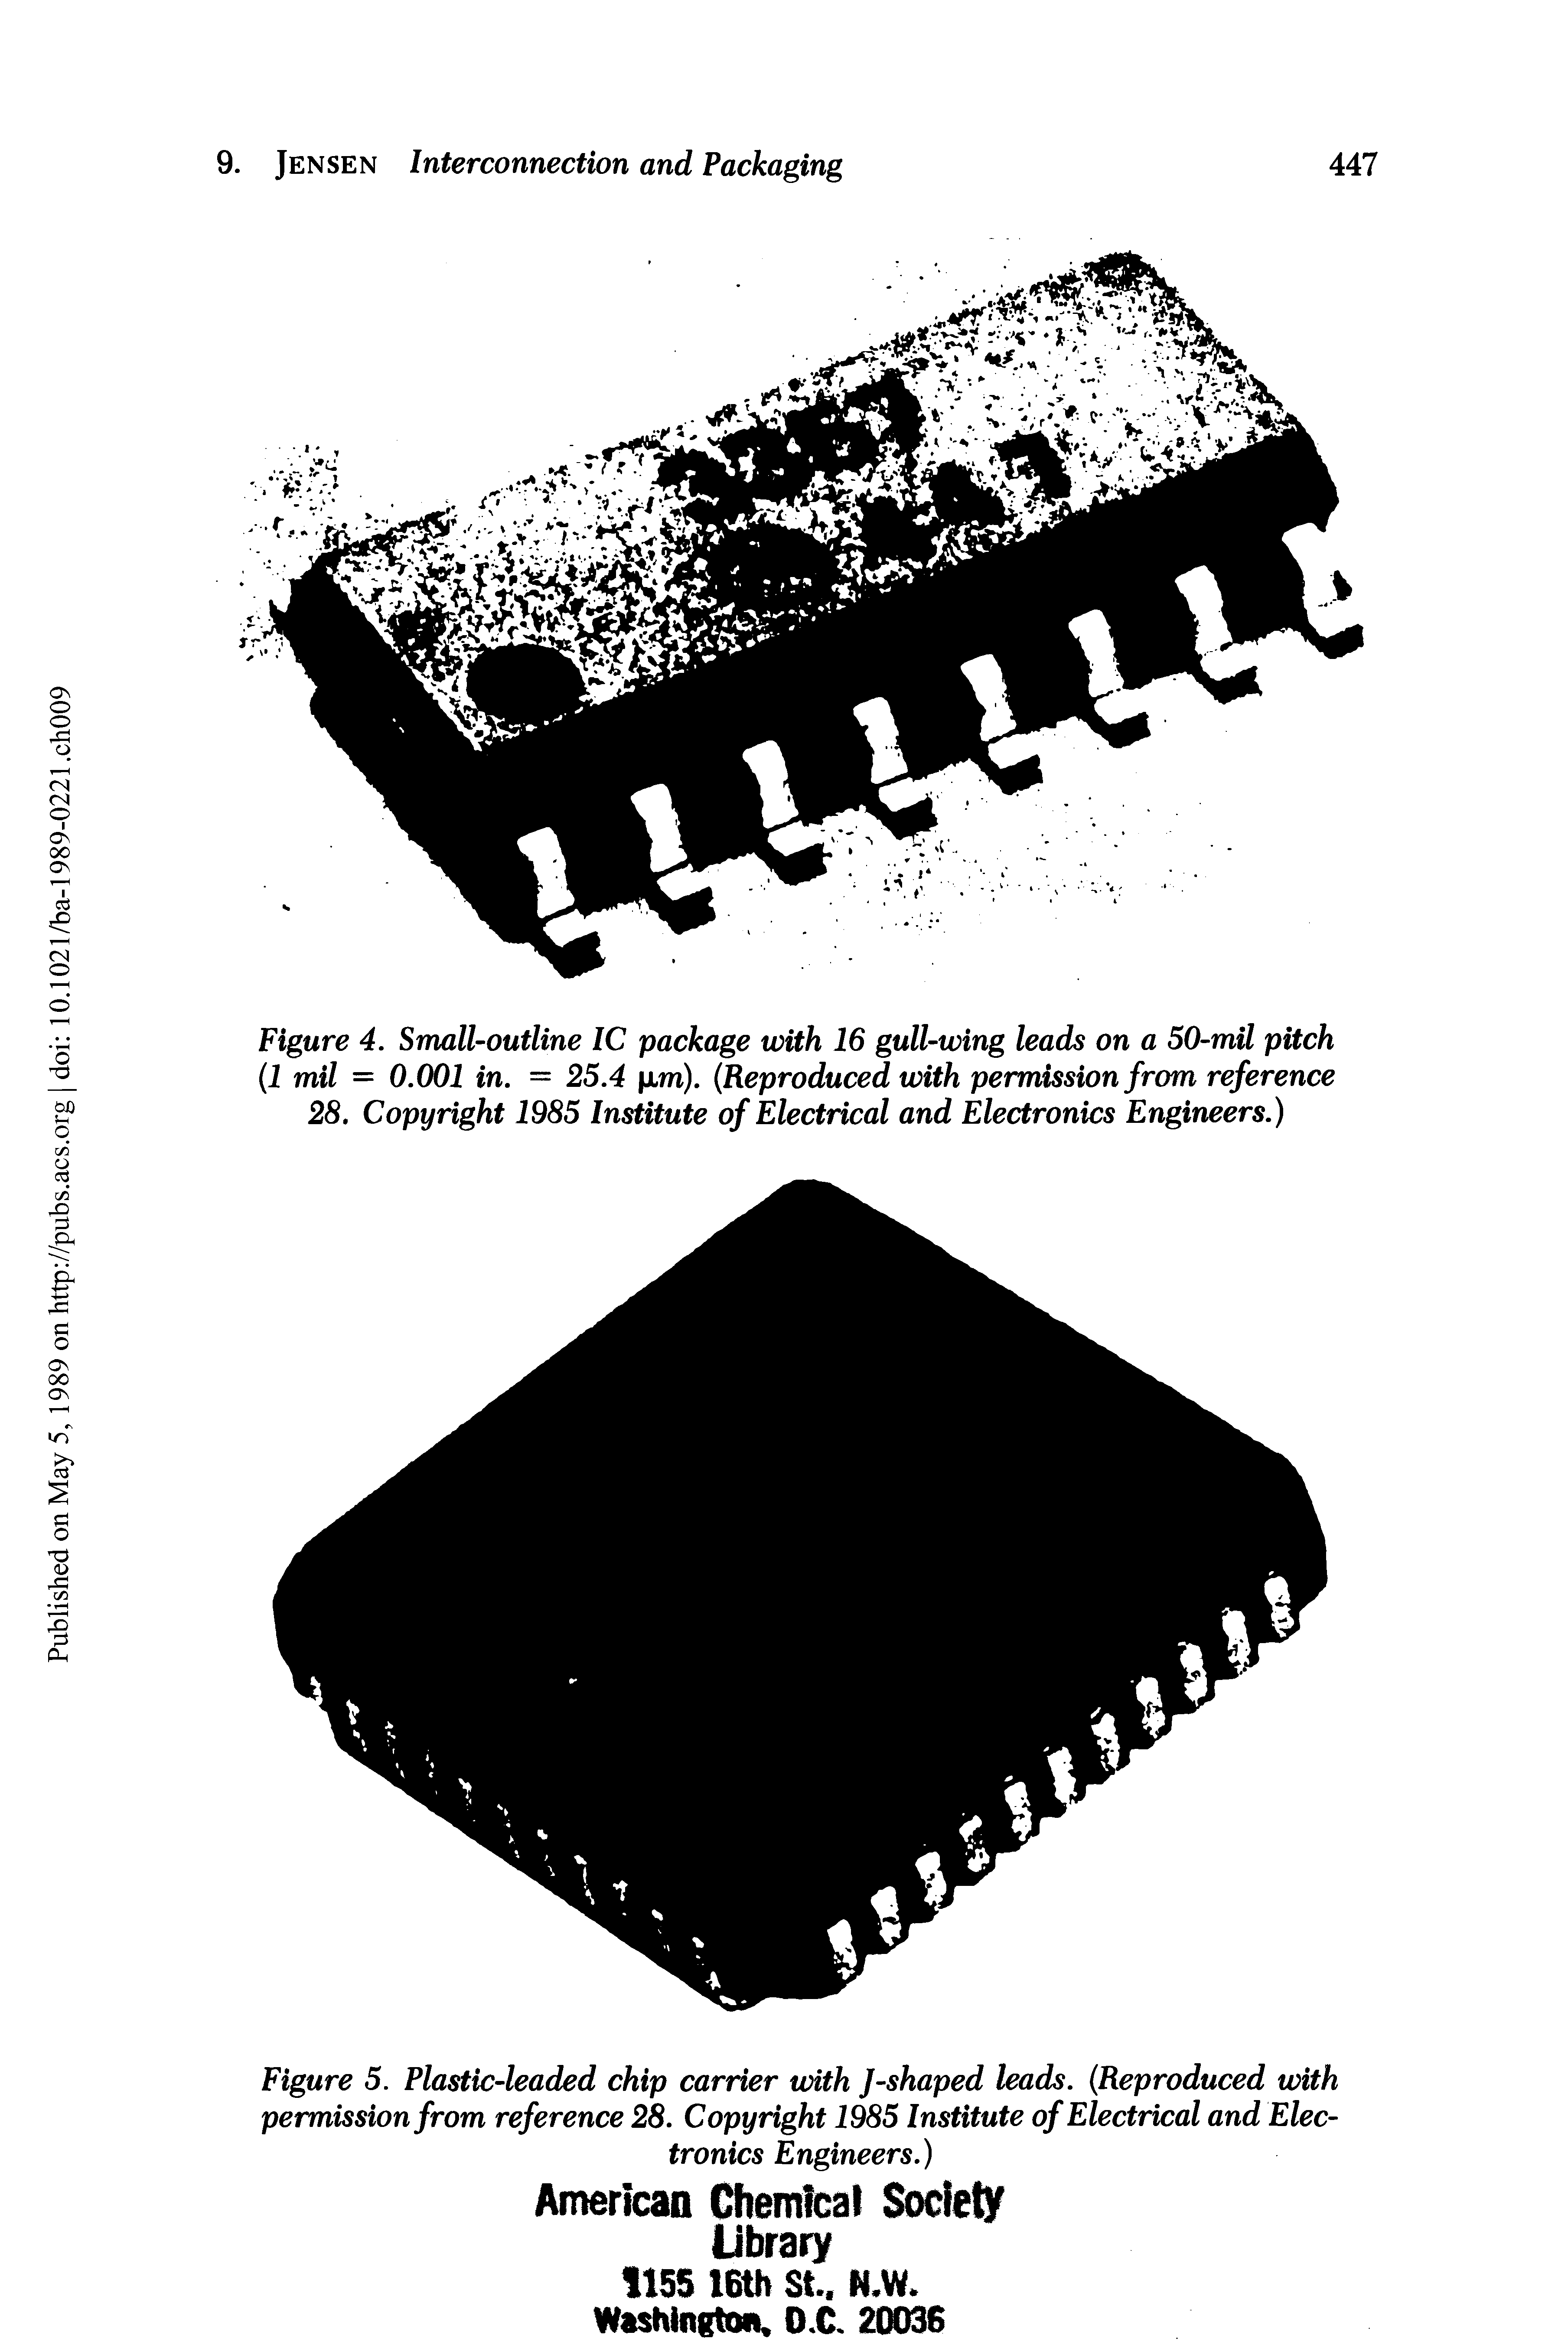 Figure 5. Plastic-leaded chip carrier with J-shaped leads. (Reproduced with permission from reference 28. Copyright 1985 Institute of Electrical and Electronics Engineers.)...